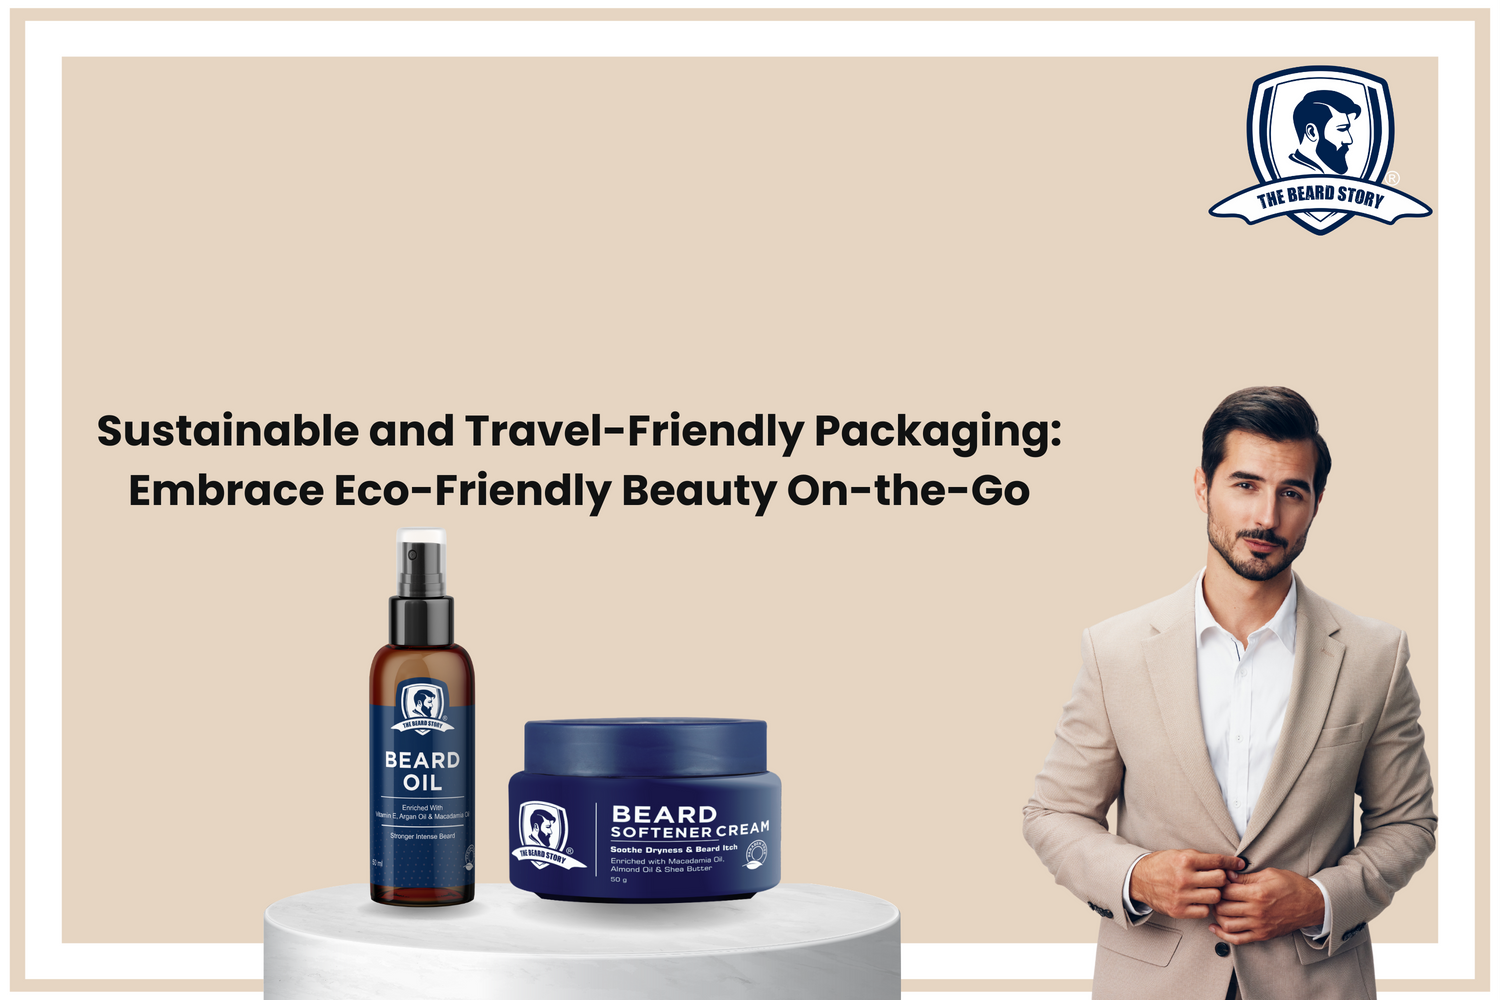 Sustainable and Travel-Friendly Packaging: Embrace Eco-Friendly Beauty On-the-Go